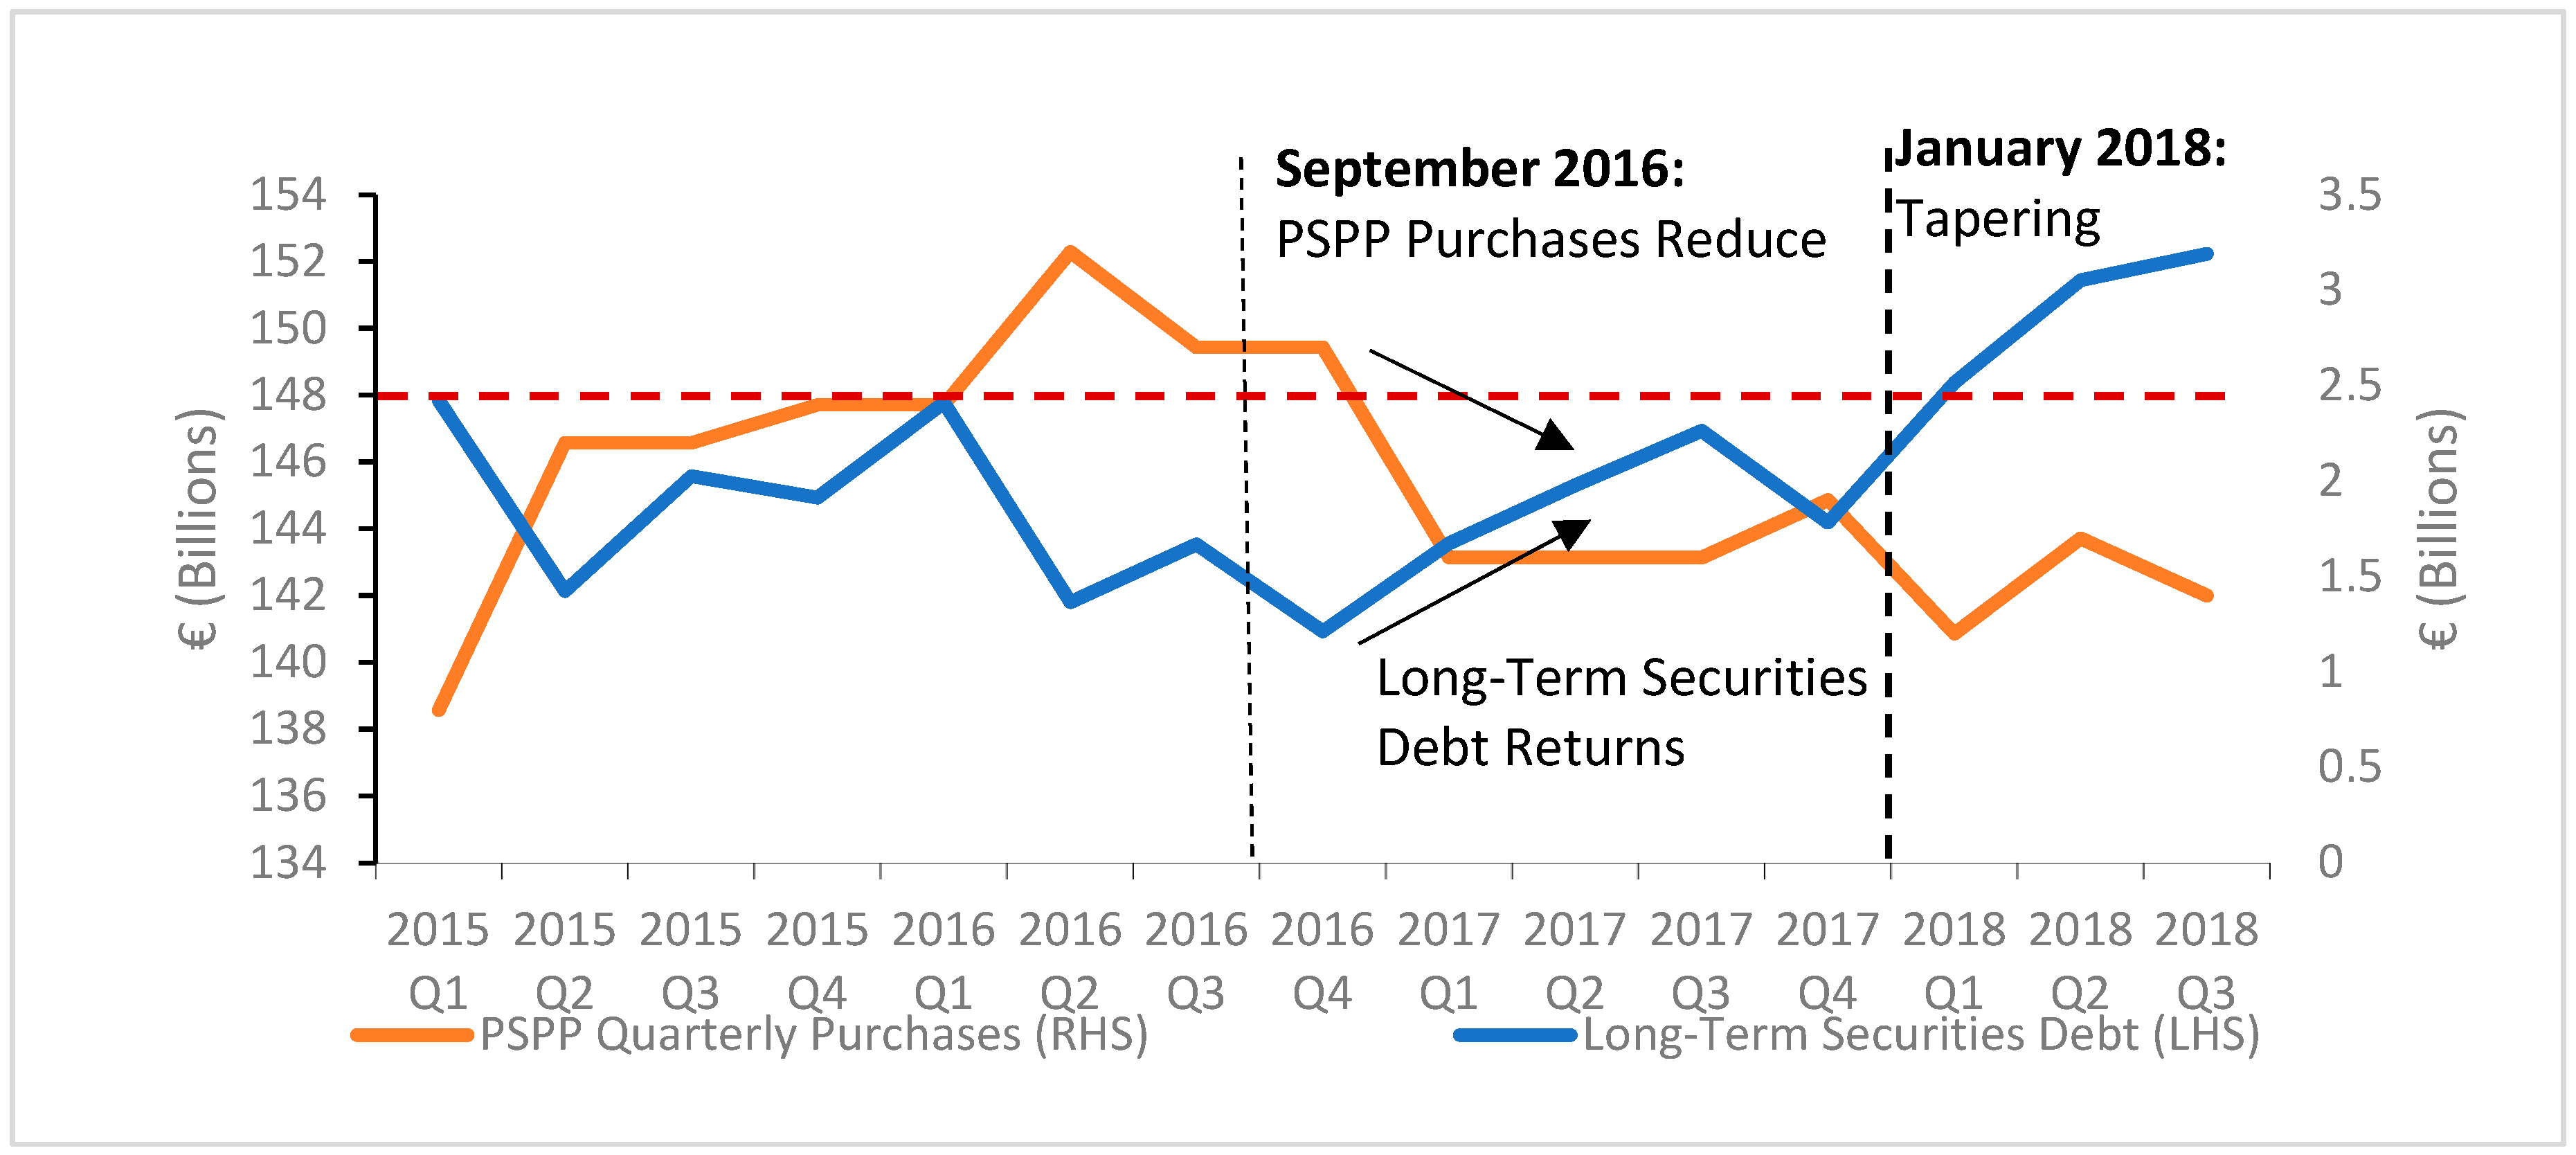 Large Scale Central Bank Asset Purchases Versus Supply Council